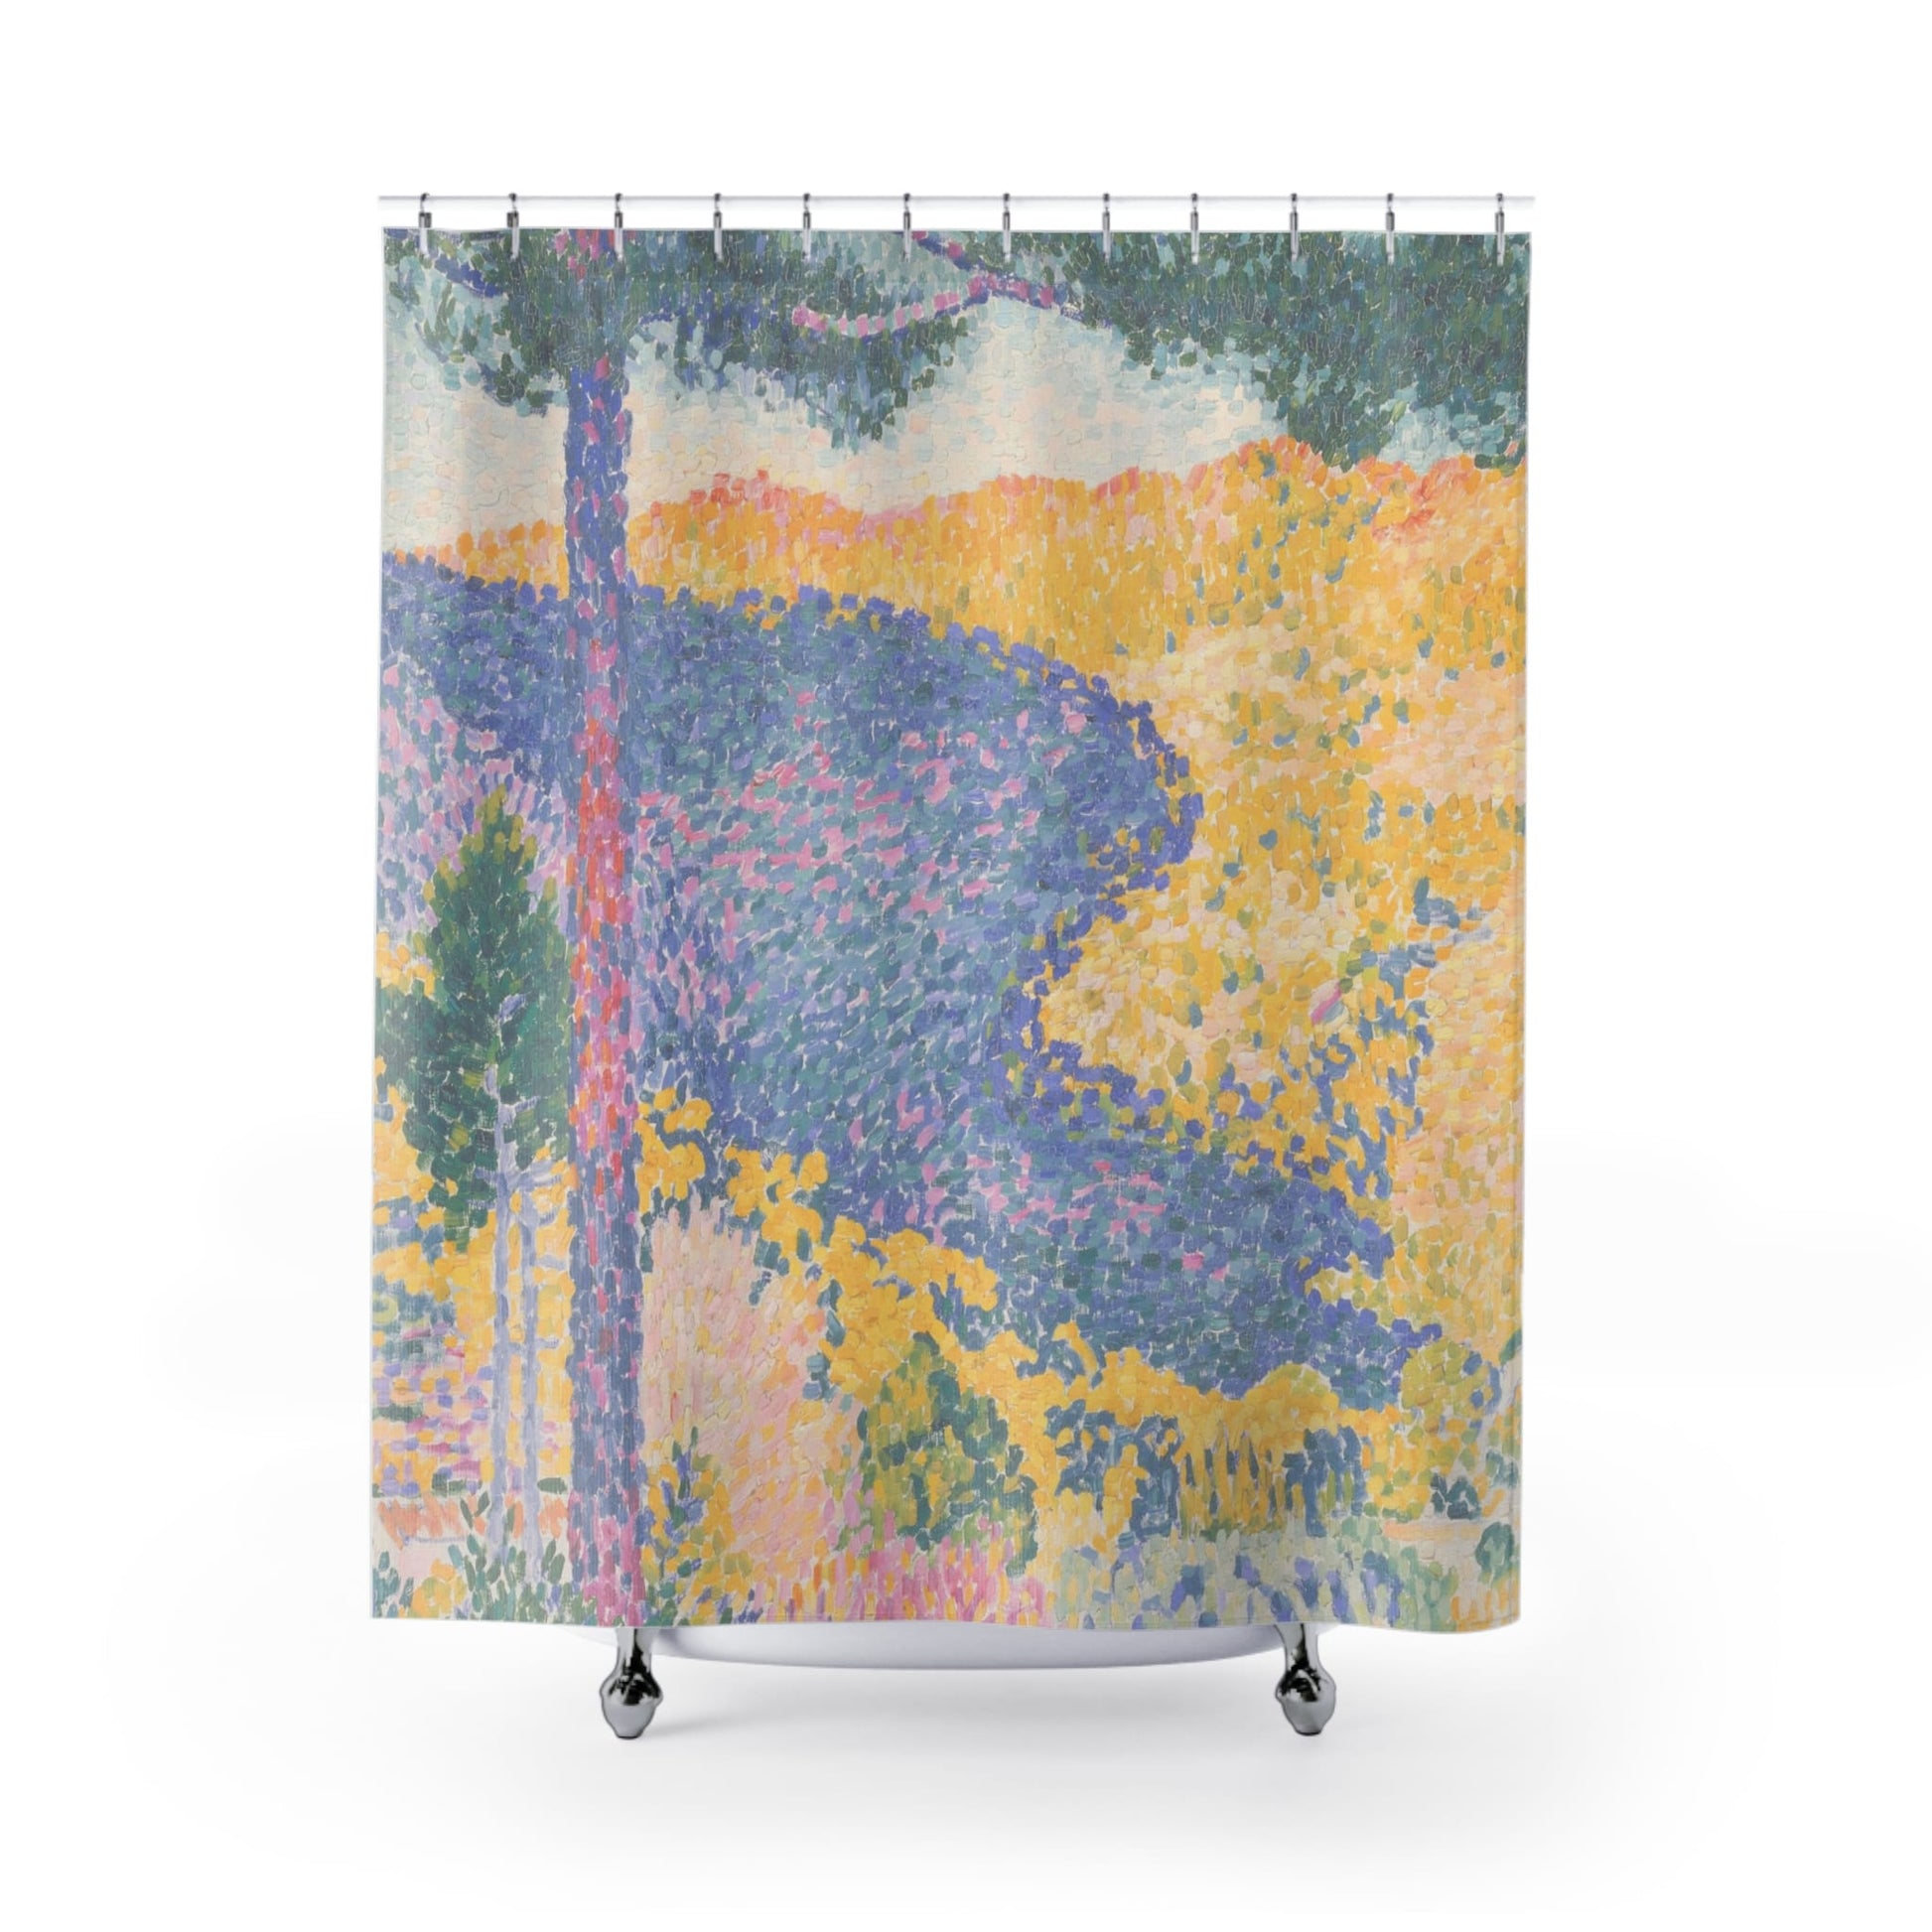 Colorful Landscape Shower Curtain with beautiful nature design, vibrant bathroom decor featuring lush natural scenery.